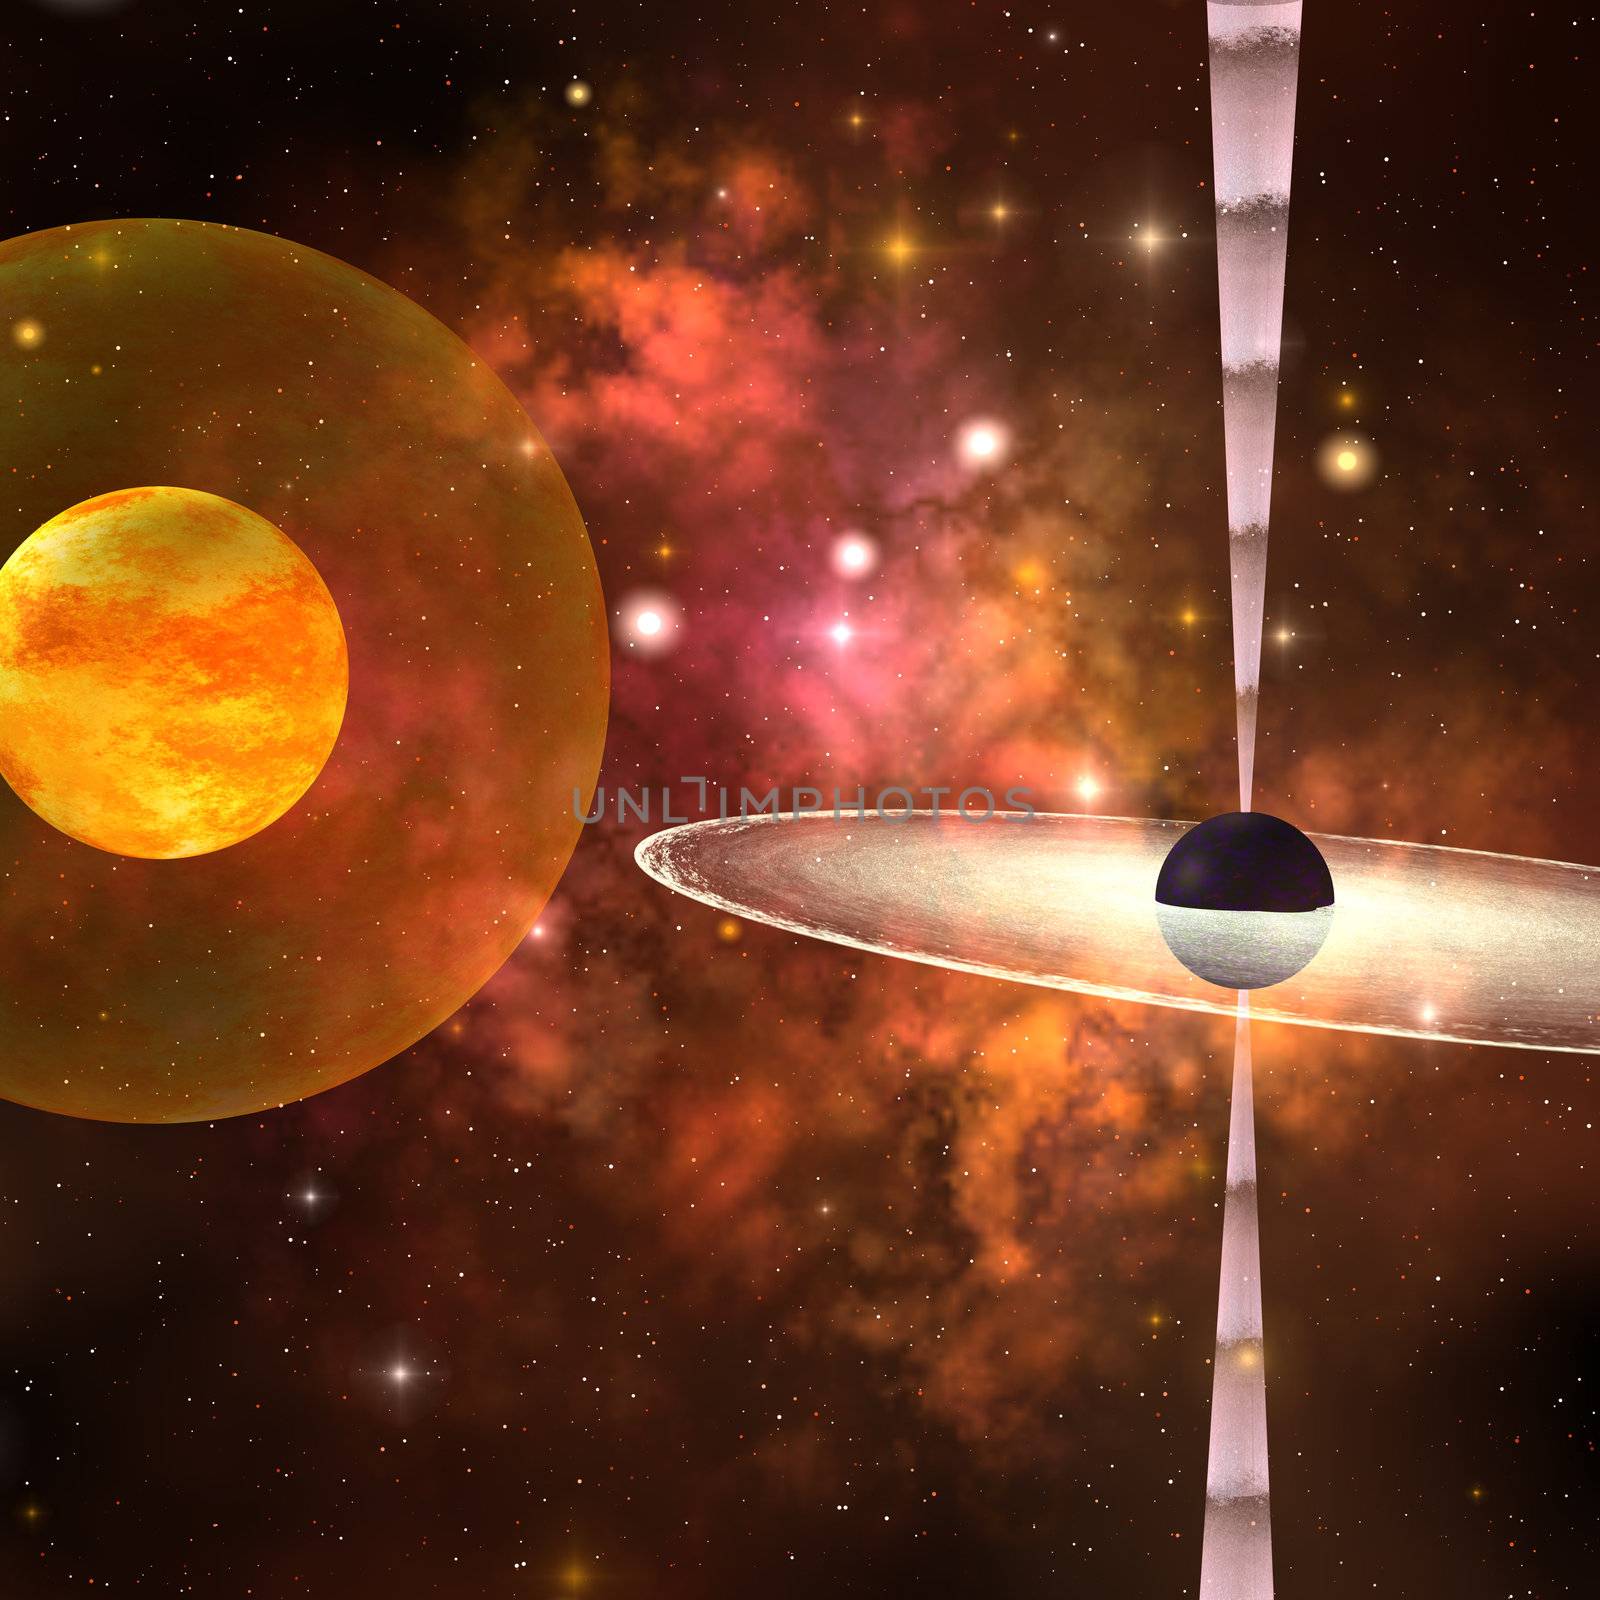 A huge sun encircled by an energy field orbits near a black hole in space.